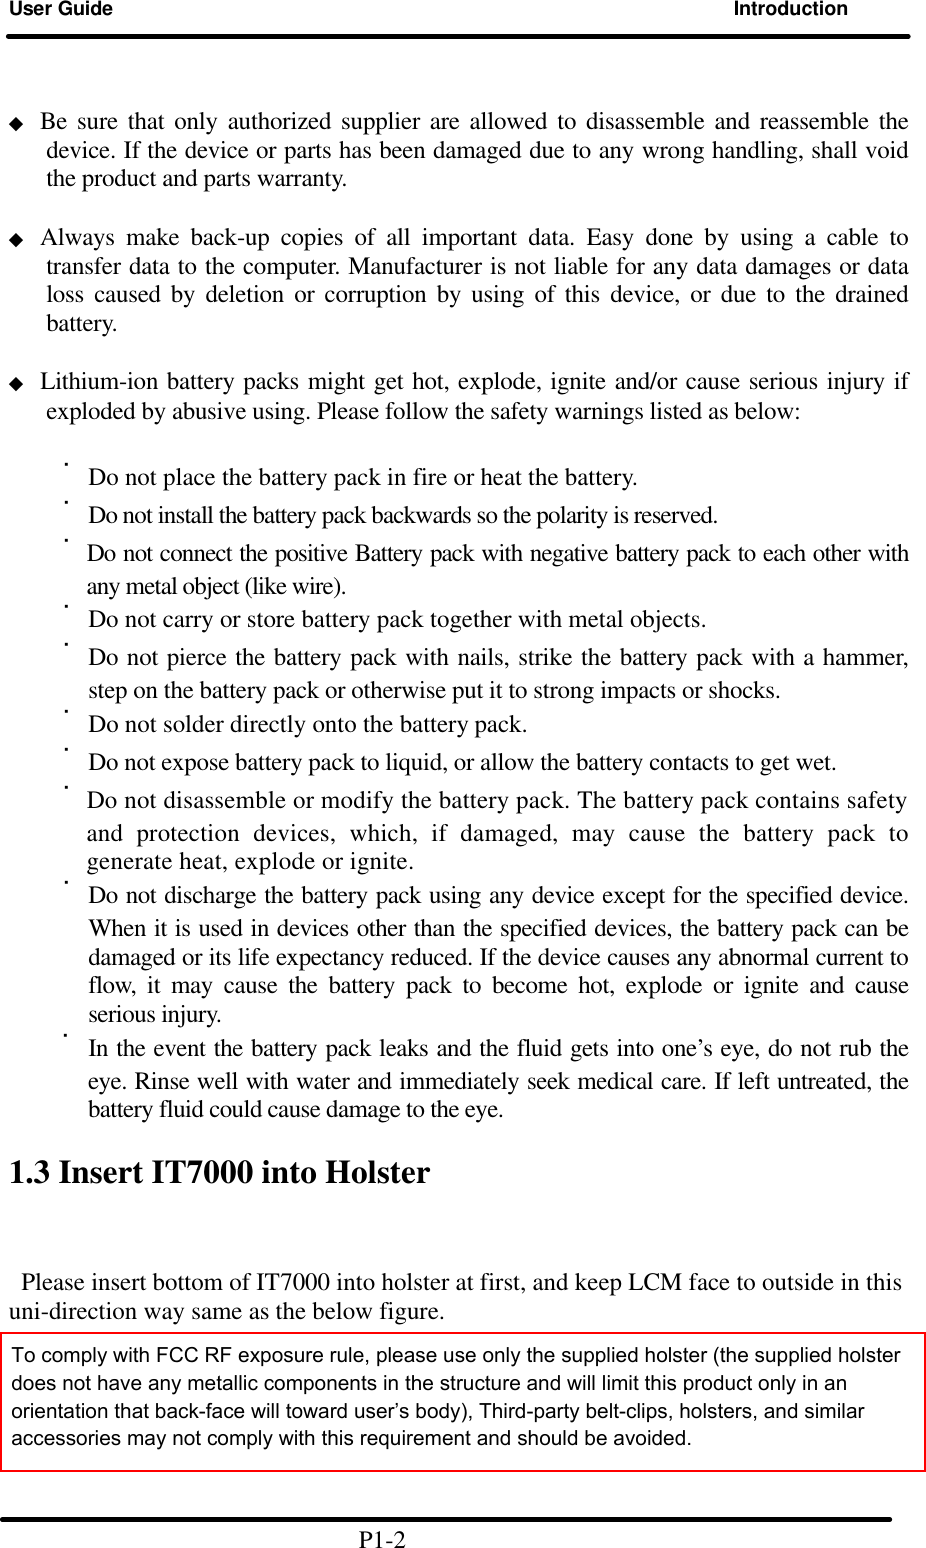 User Guide Introduction                    ◆ Be sure that only authorized supplier are allowed to disassemble and reassemble the device. If the device or parts has been damaged due to any wrong handling, shall void the product and parts warranty.  ◆ Always make back-up copies of all important data. Easy done by using a cable to transfer data to the computer. Manufacturer is not liable for any data damages or data loss caused by deletion or corruption by using of this device, or due to the drained battery.    ◆ Lithium-ion battery packs might get hot, explode, ignite and/or cause serious injury if exploded by abusive using. Please follow the safety warnings listed as below:  ˙Do not place the battery pack in fire or heat the battery. ˙Do not install the battery pack backwards so the polarity is reserved.   ˙Do not connect the positive Battery pack with negative battery pack to each other with any metal object (like wire). ˙Do not carry or store battery pack together with metal objects. ˙Do not pierce the battery pack with nails, strike the battery pack with a hammer, step on the battery pack or otherwise put it to strong impacts or shocks. ˙Do not solder directly onto the battery pack. ˙Do not expose battery pack to liquid, or allow the battery contacts to get wet. ˙Do not disassemble or modify the battery pack. The battery pack contains safety and protection devices, which, if damaged, may cause the battery pack to generate heat, explode or ignite. ˙Do not discharge the battery pack using any device except for the specified device. When it is used in devices other than the specified devices, the battery pack can be damaged or its life expectancy reduced. If the device causes any abnormal current to flow, it may cause the battery pack to become hot, explode or ignite and cause serious injury. ˙In the event the battery pack leaks and the fluid gets into one’s eye, do not rub the eye. Rinse well with water and immediately seek medical care. If left untreated, the battery fluid could cause damage to the eye.  1.3 Insert IT7000 into Holster    Please insert bottom of IT7000 into holster at first, and keep LCM face to outside in this uni-direction way same as the below figure.                                 P1-2 To comply with FCC RF exposure rule, please use only the supplied holster (the supplied holster does not have any metallic components in the structure and will limit this product only in an orientation that back-face will toward user’s body), Third-party belt-clips, holsters, and similar accessories may not comply with this requirement and should be avoided. 